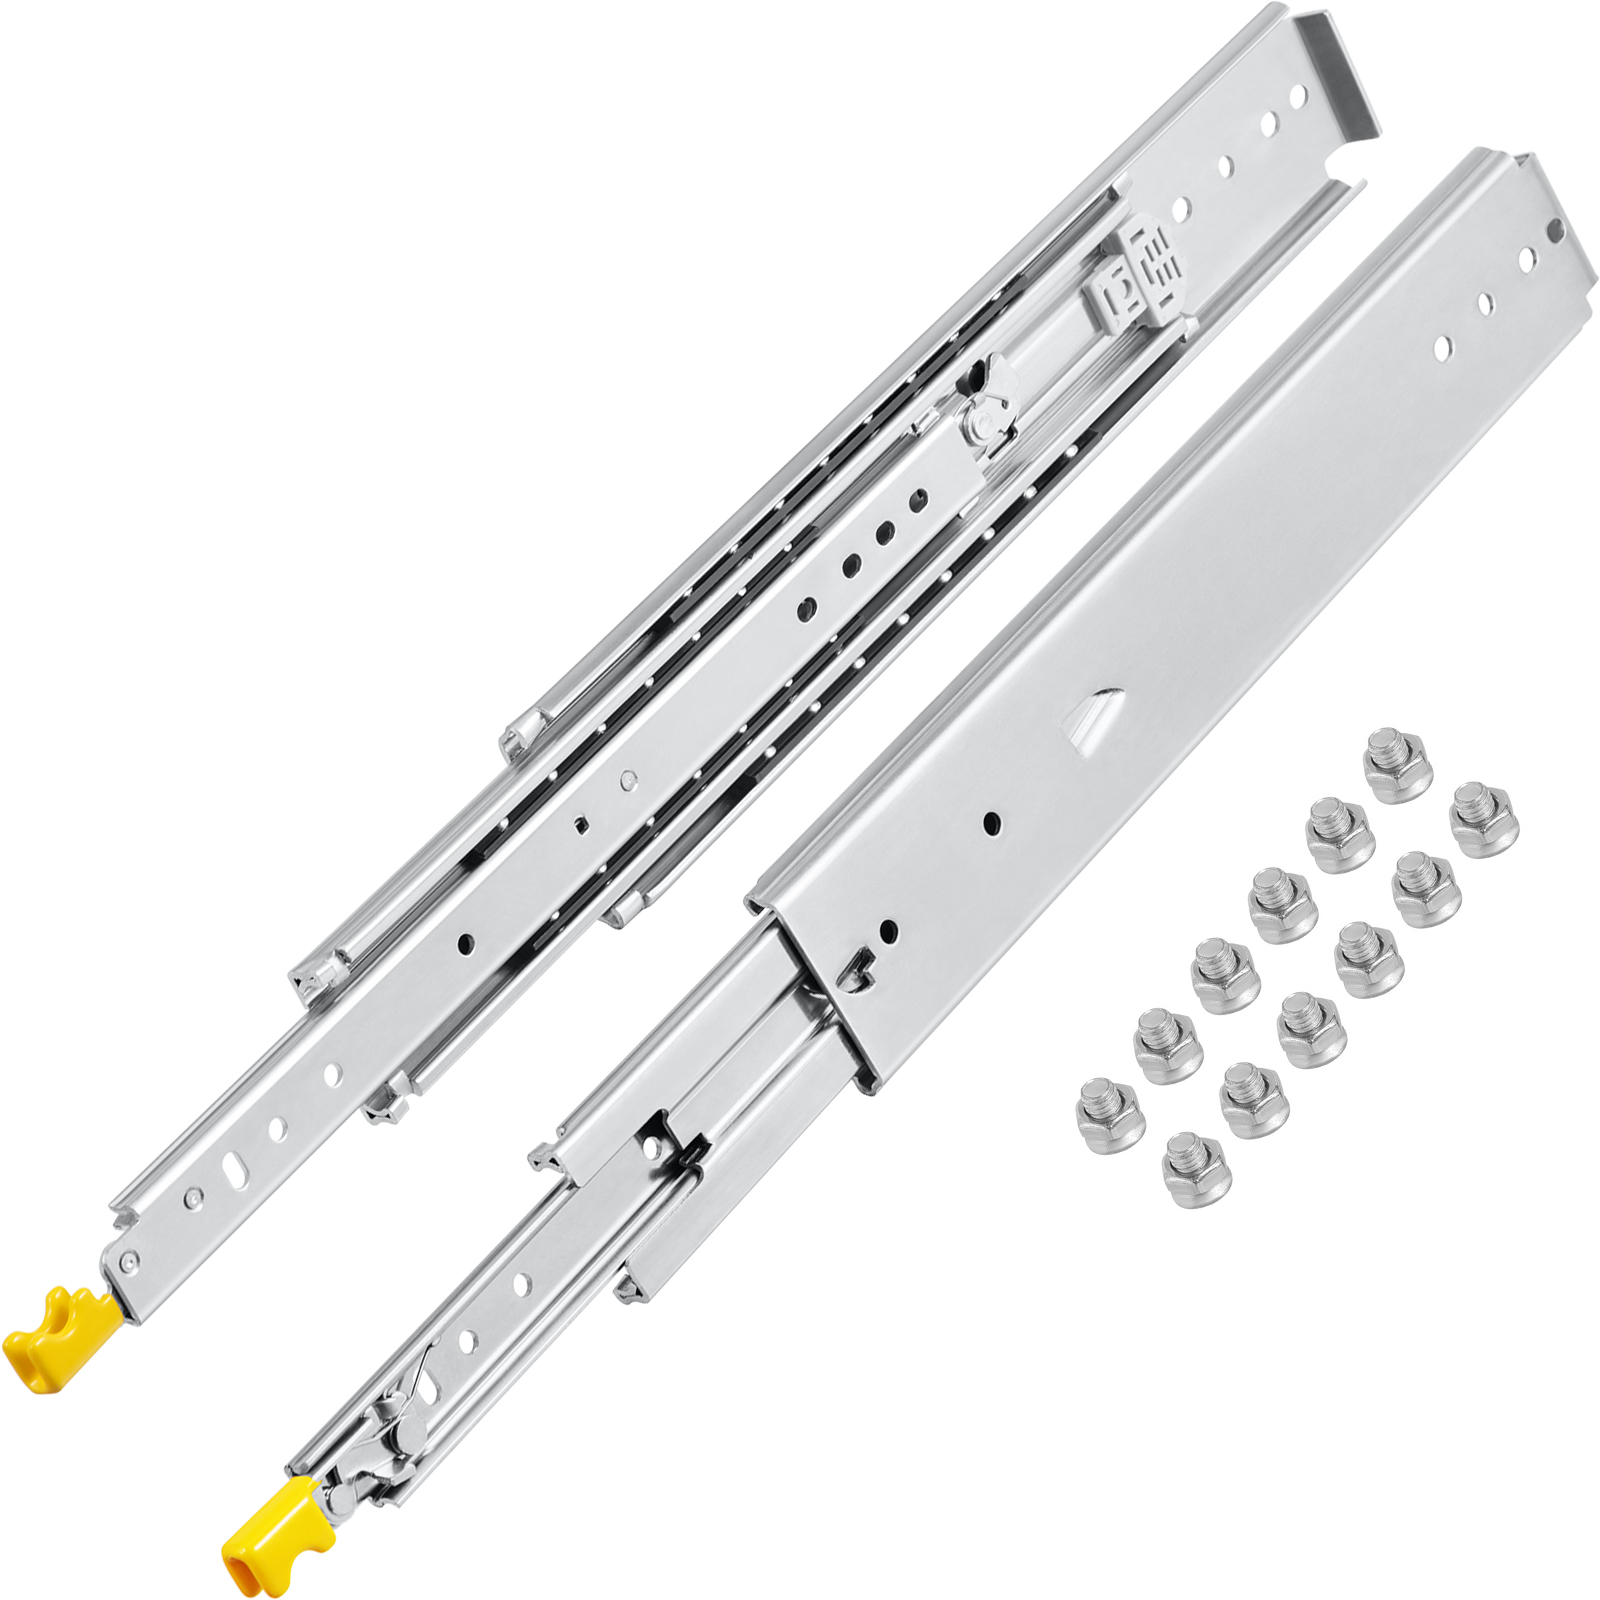 Drawer Slides,500lbs Load Capacity,With Lock